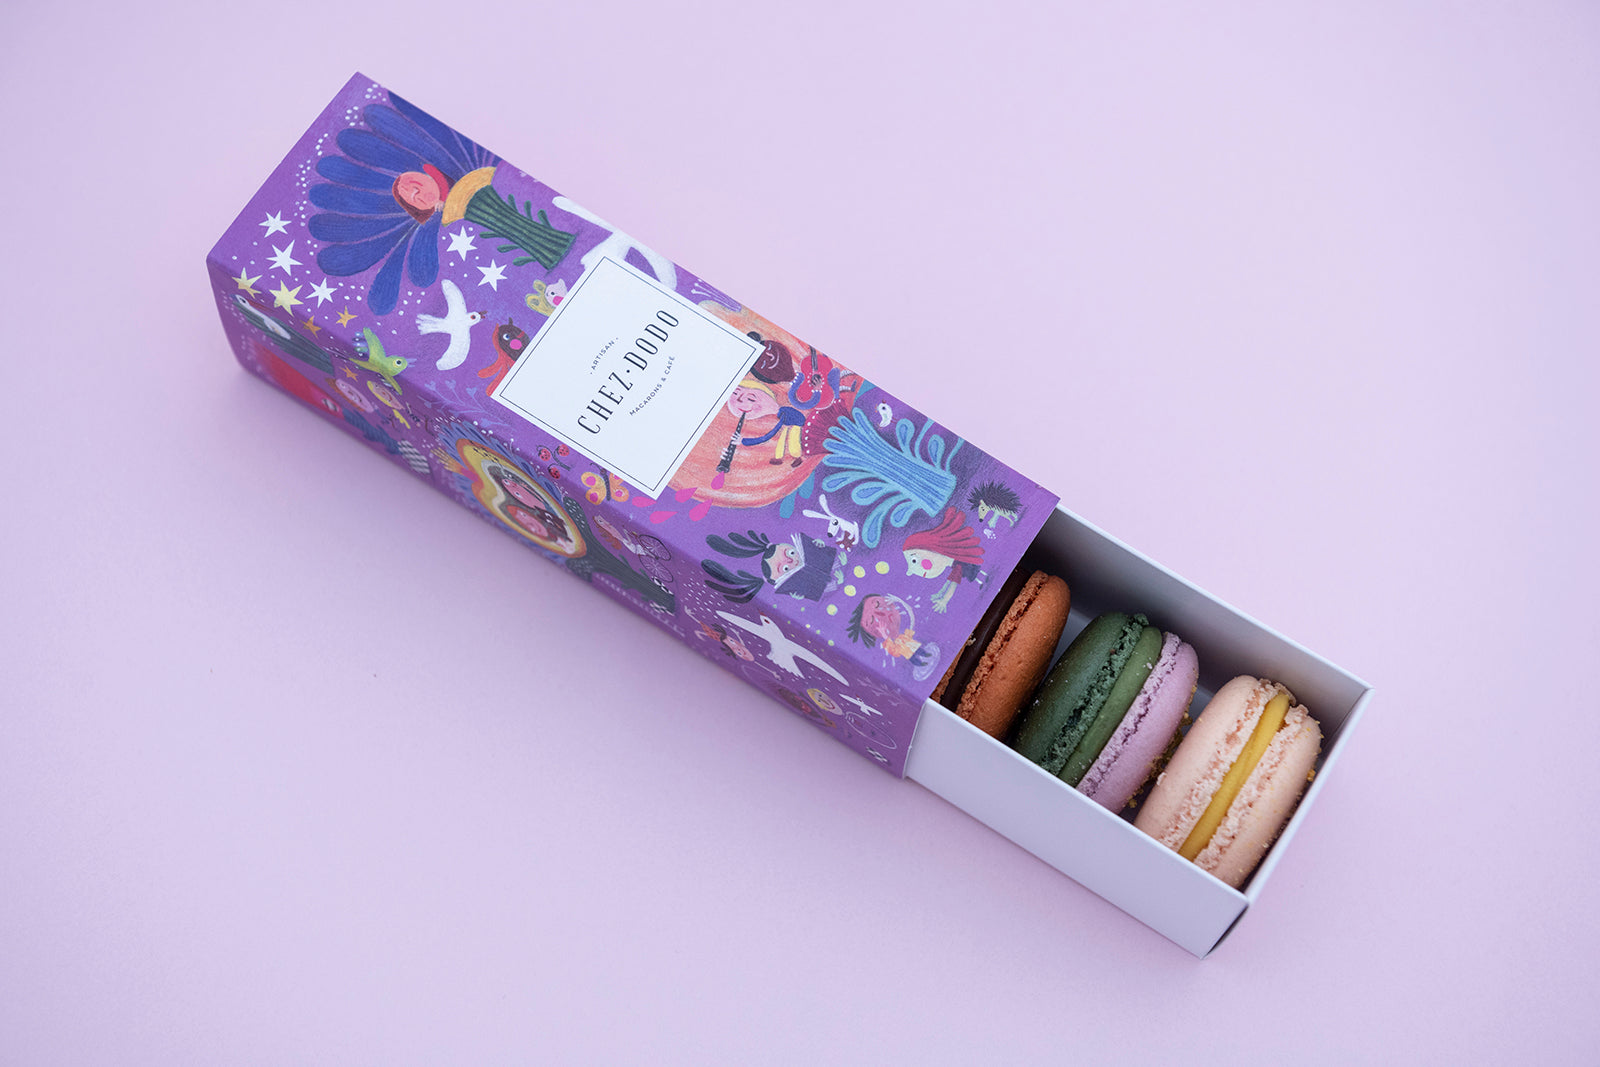 6-piece macaron selection in charity box (lilac)